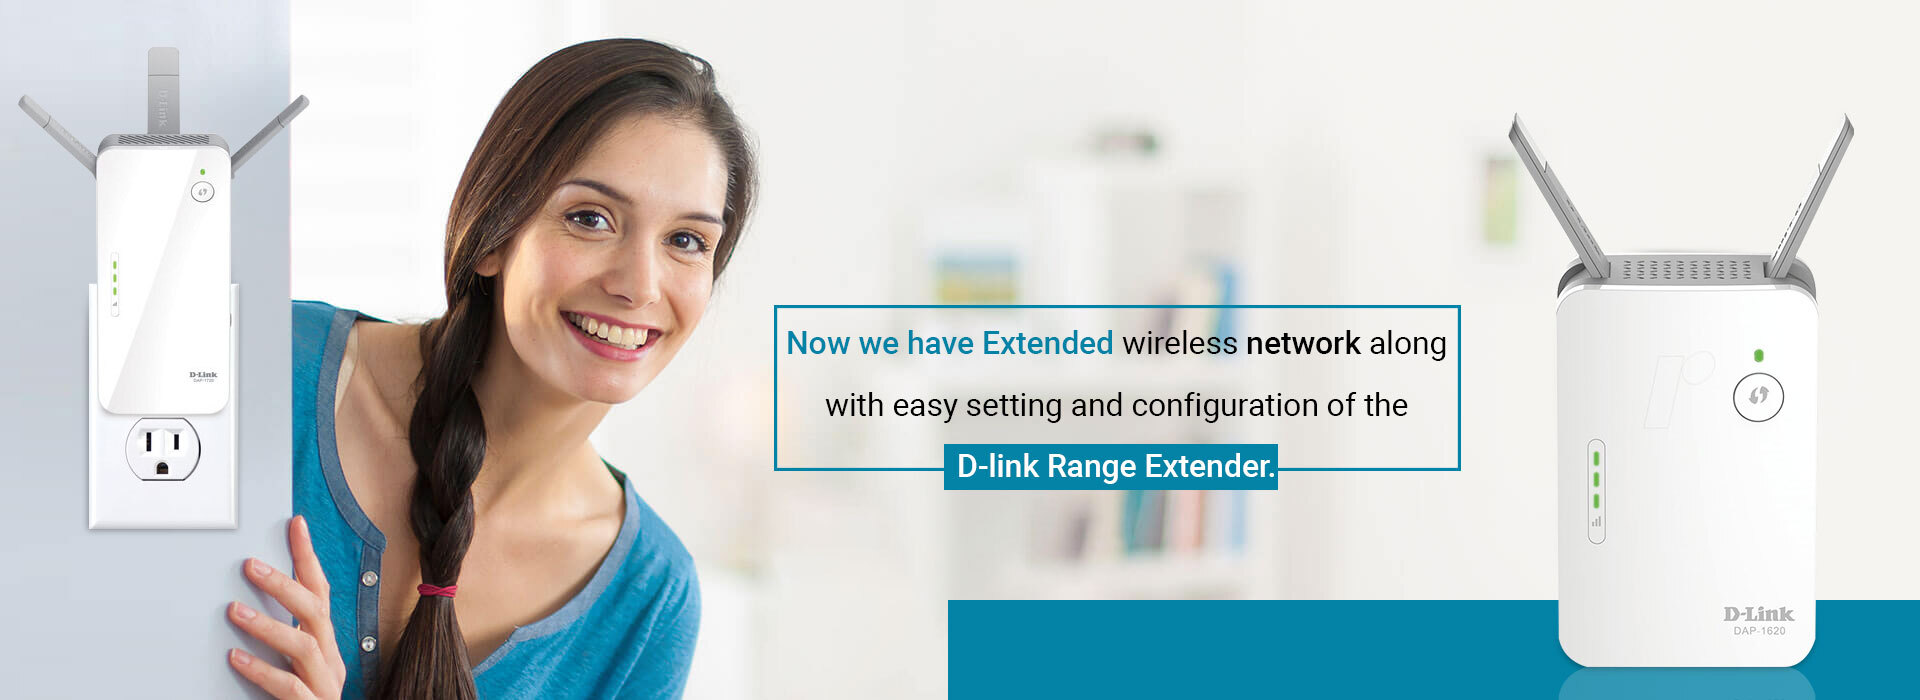 How to Change DNS on D-Link Router